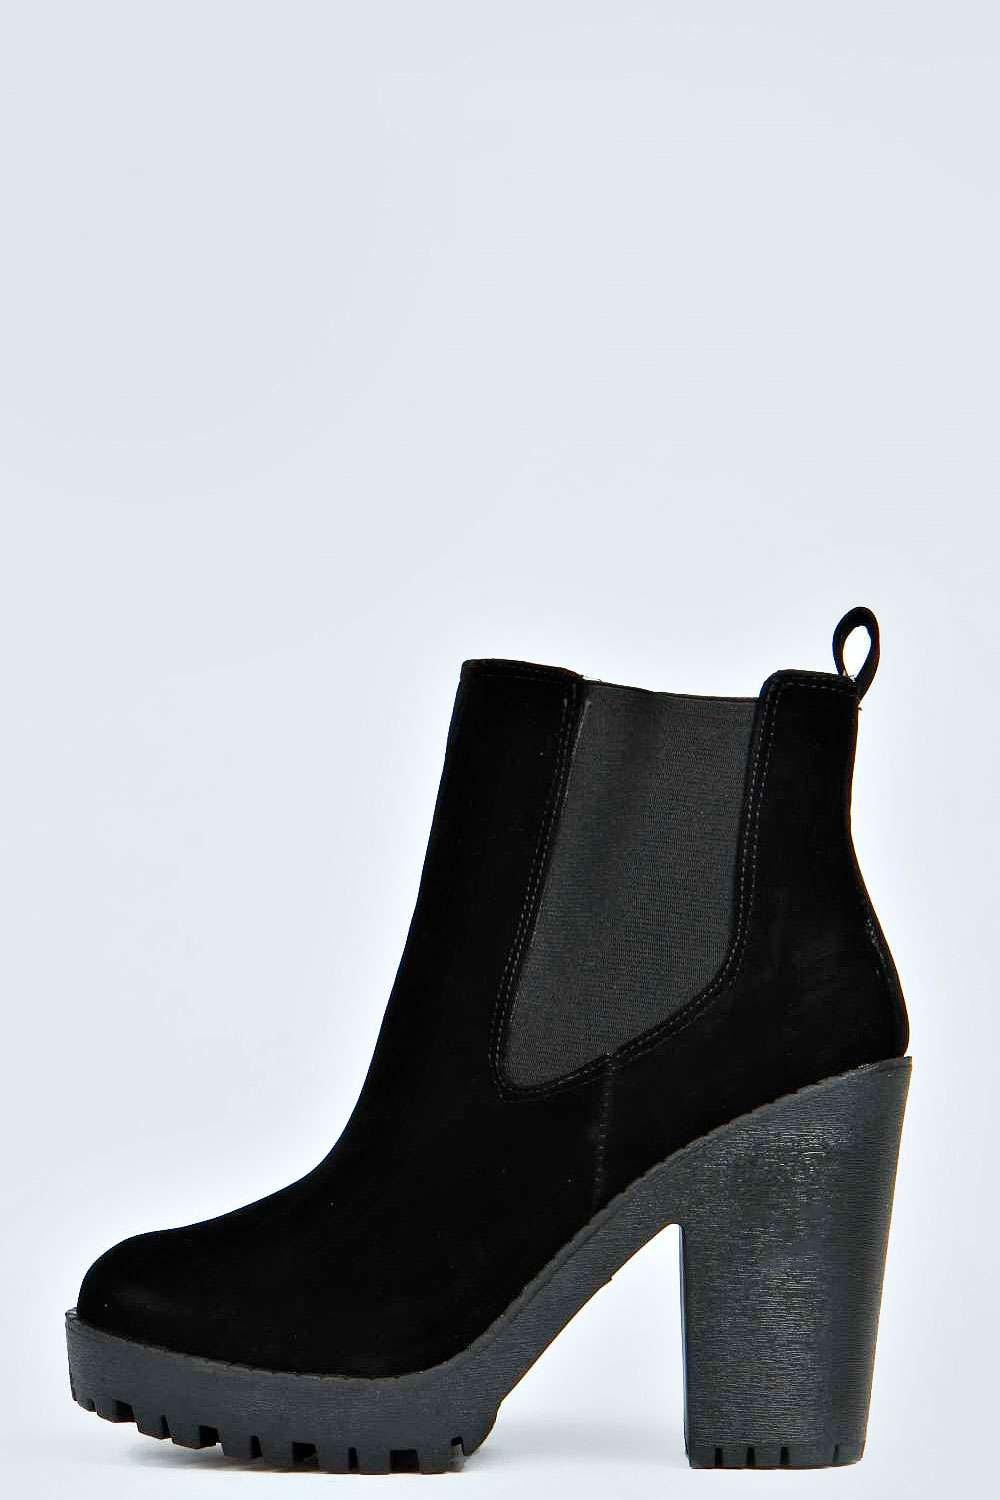 Izzy Suedette Elastic Insert Cleated Sole Boot at boohoo.com